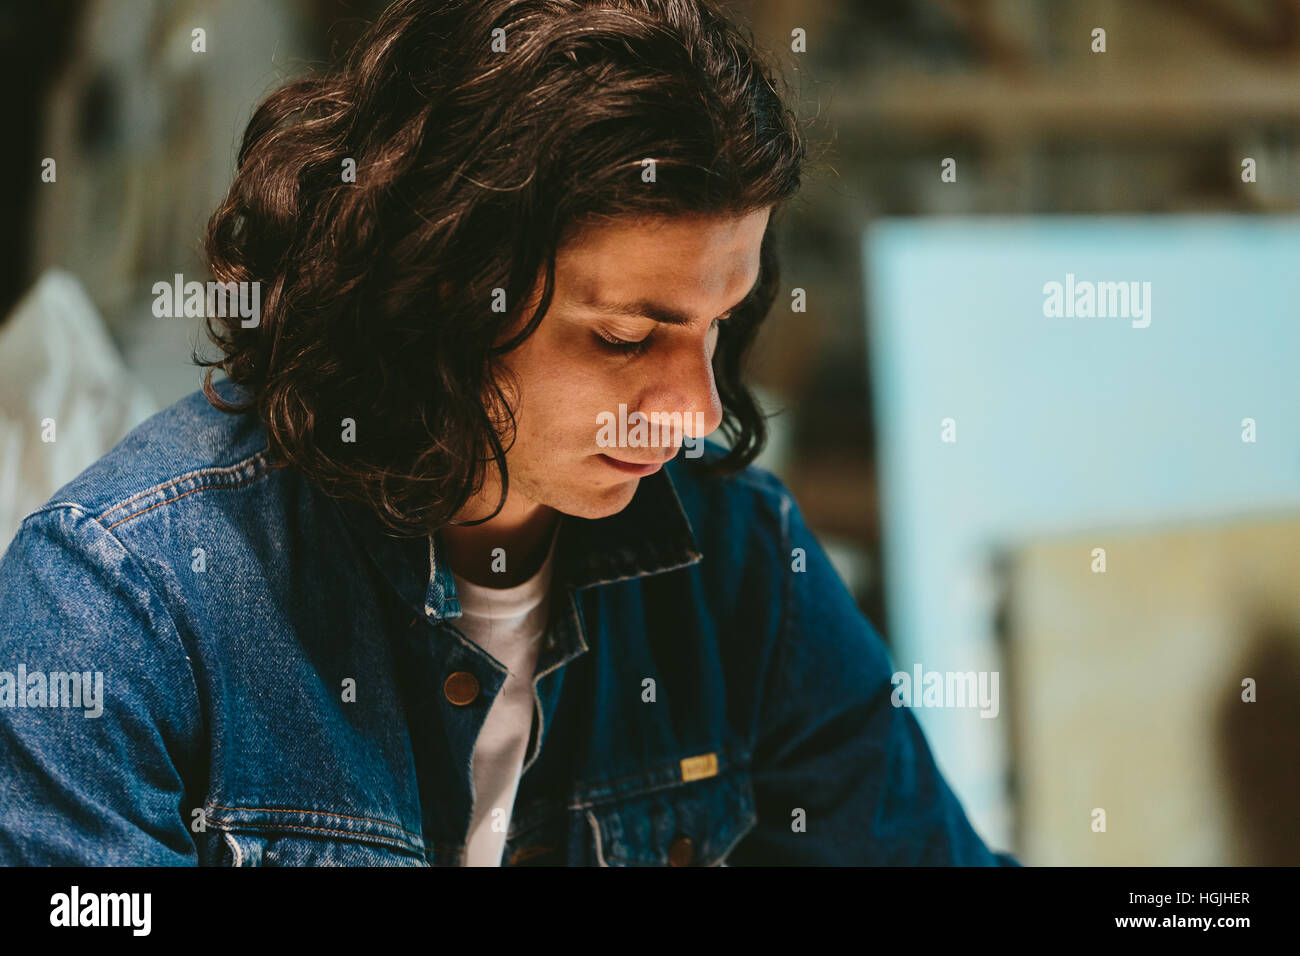 handsome man with long hair brunette in a denim jacket Stock Photo